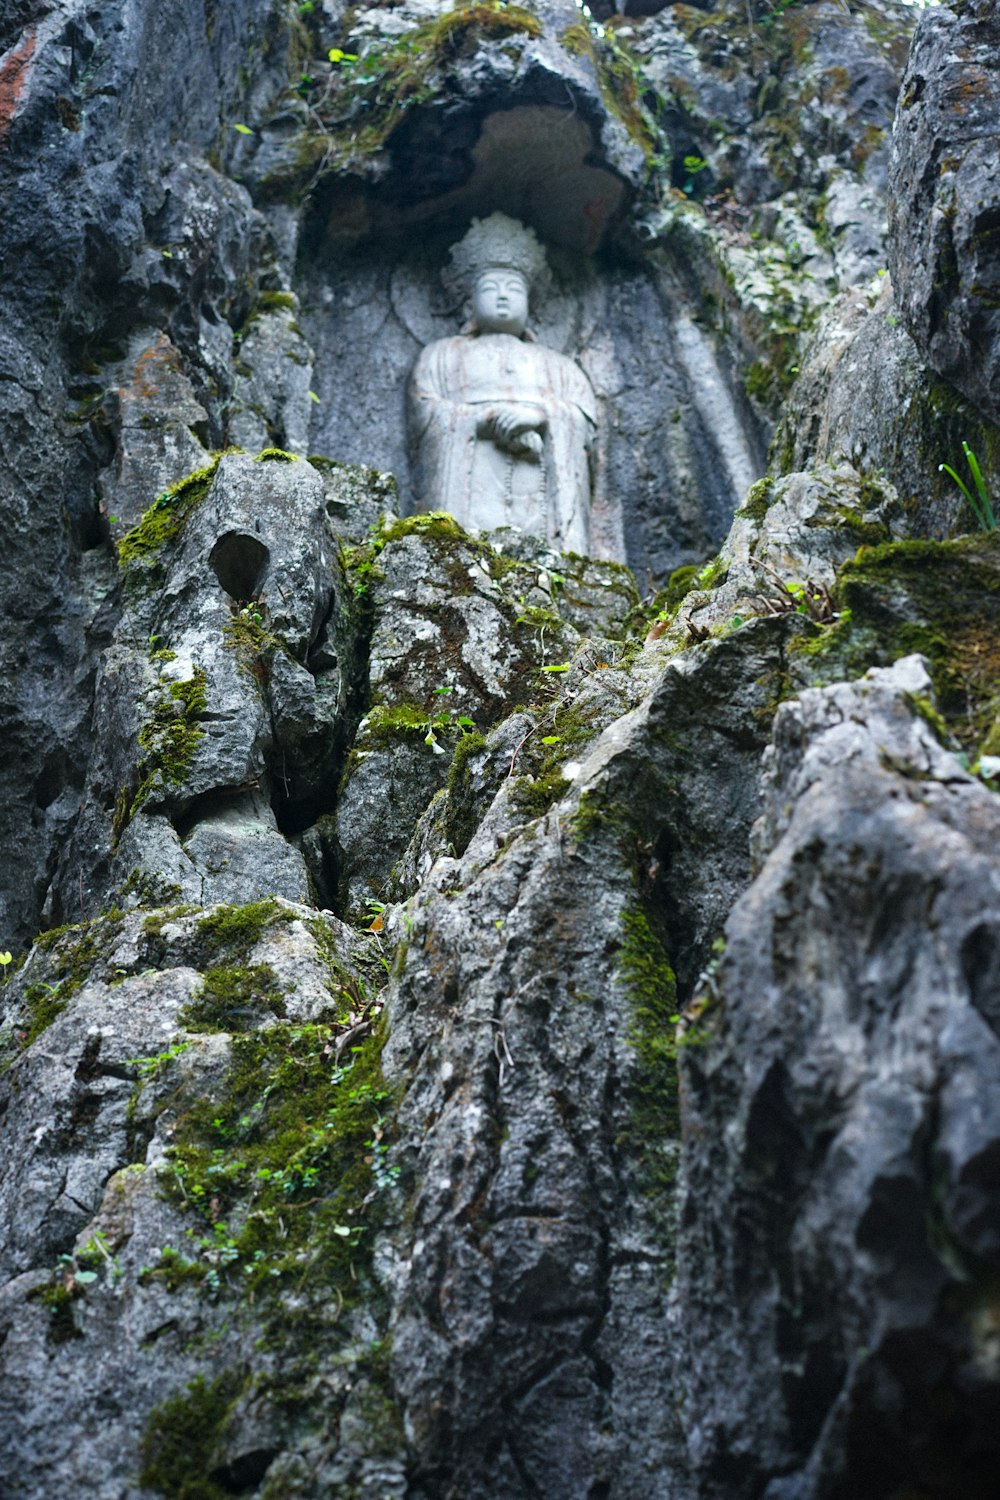 a statue of buddha in the middle of some rocks